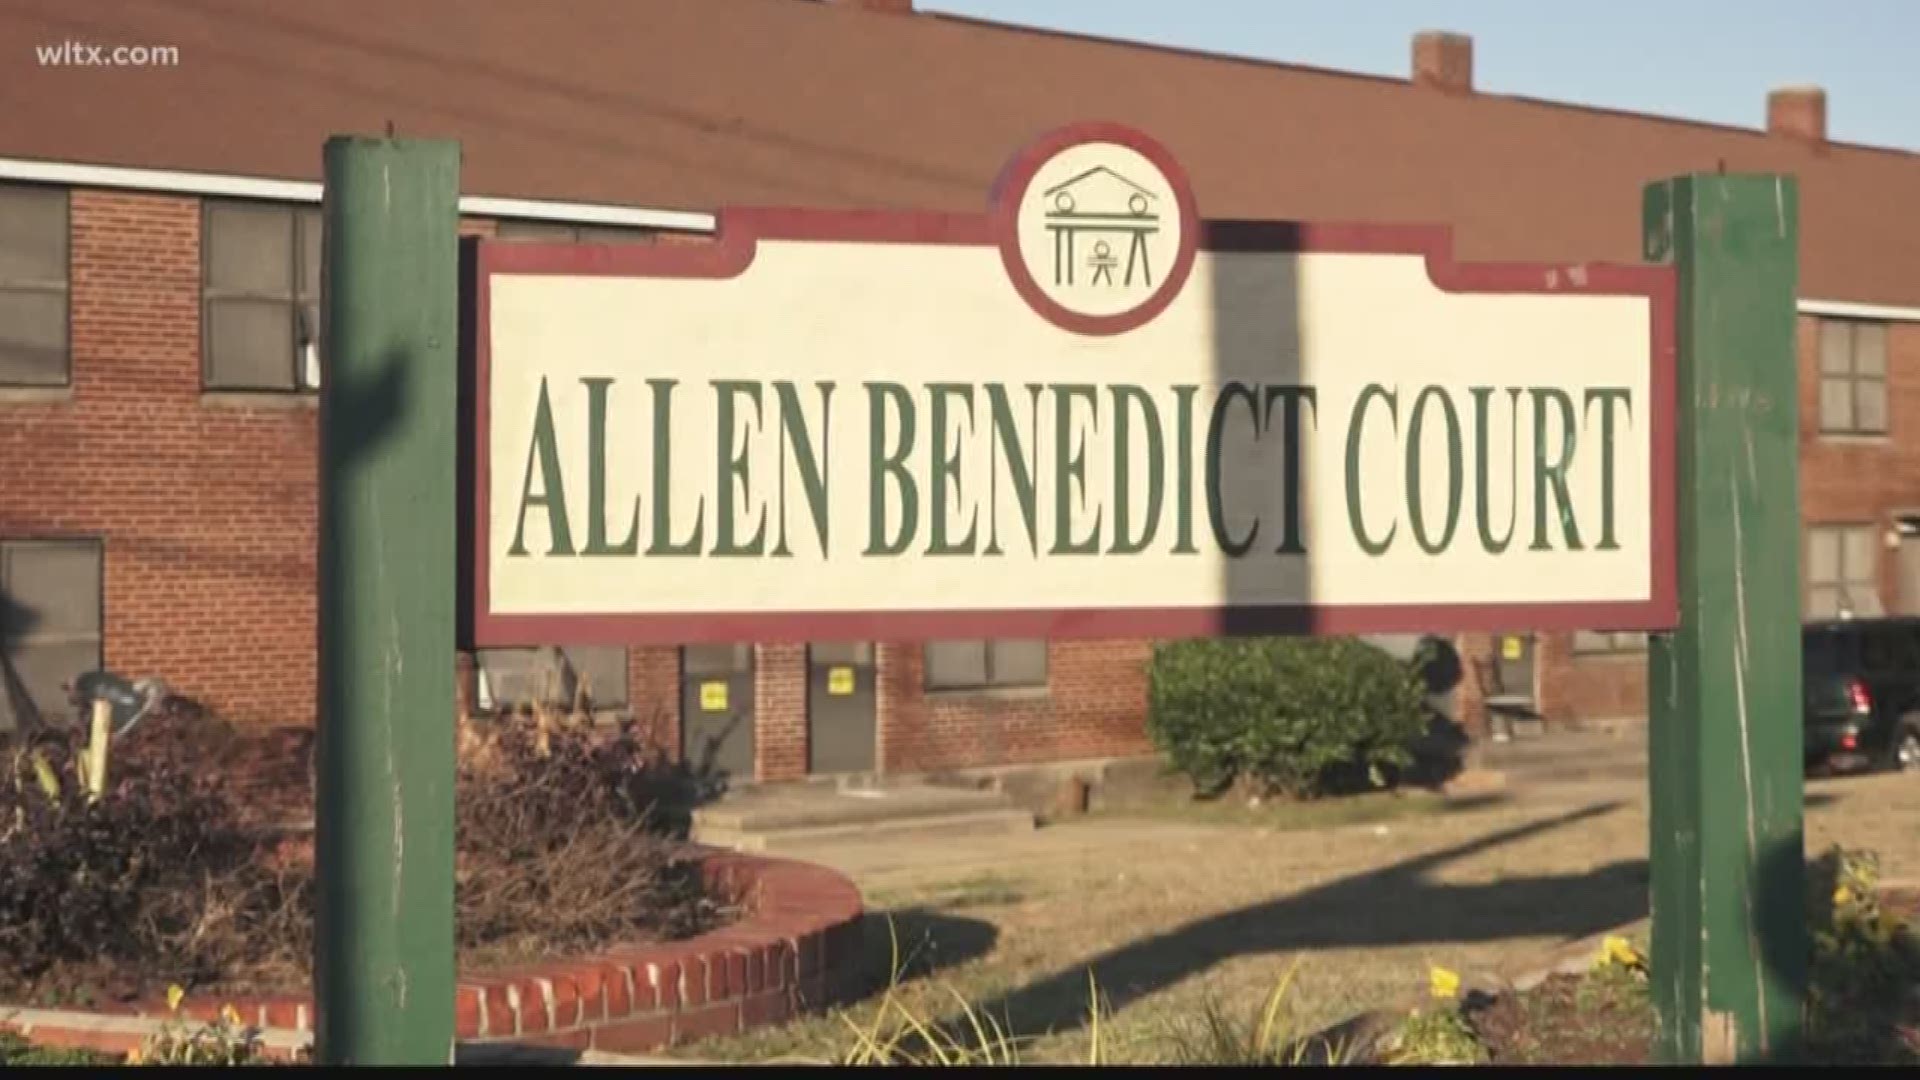 WLTX is searching for answers in the deaths of two men and the forced evacuation of over 400 people at the Allen Benedict Court apartments in Columbia, SC.